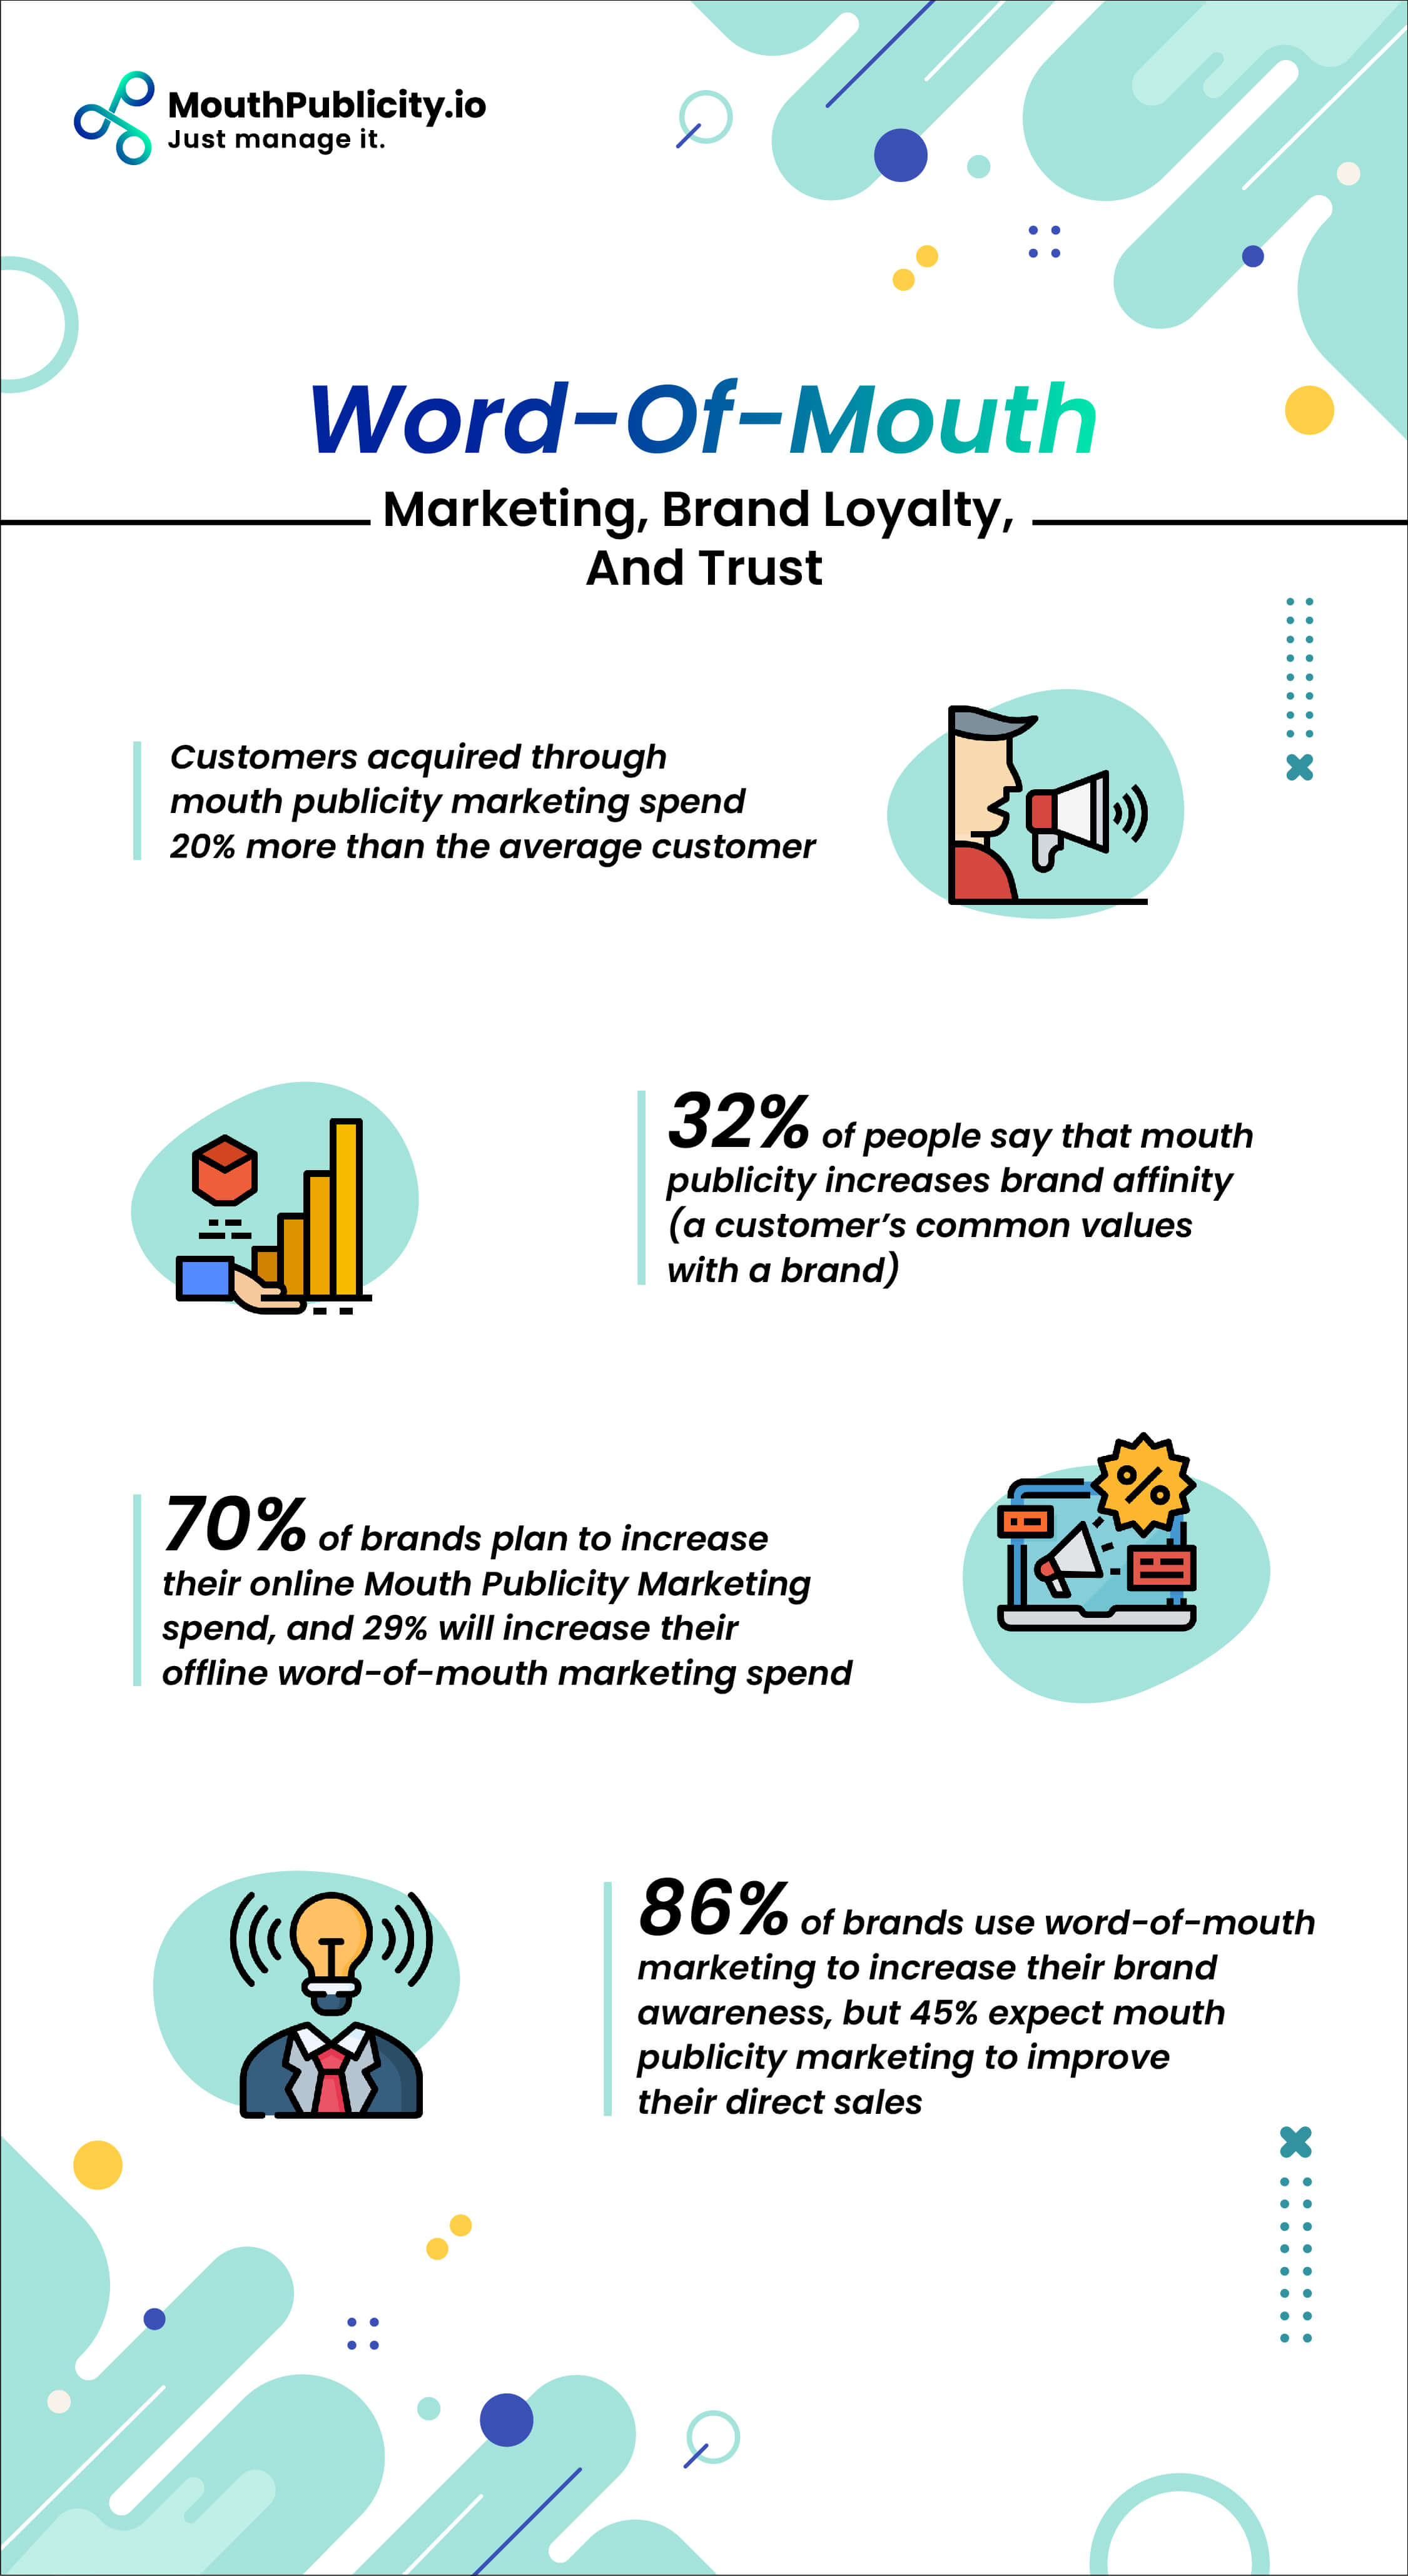 word of mouth stats on brand, loyalty and trust infographic 